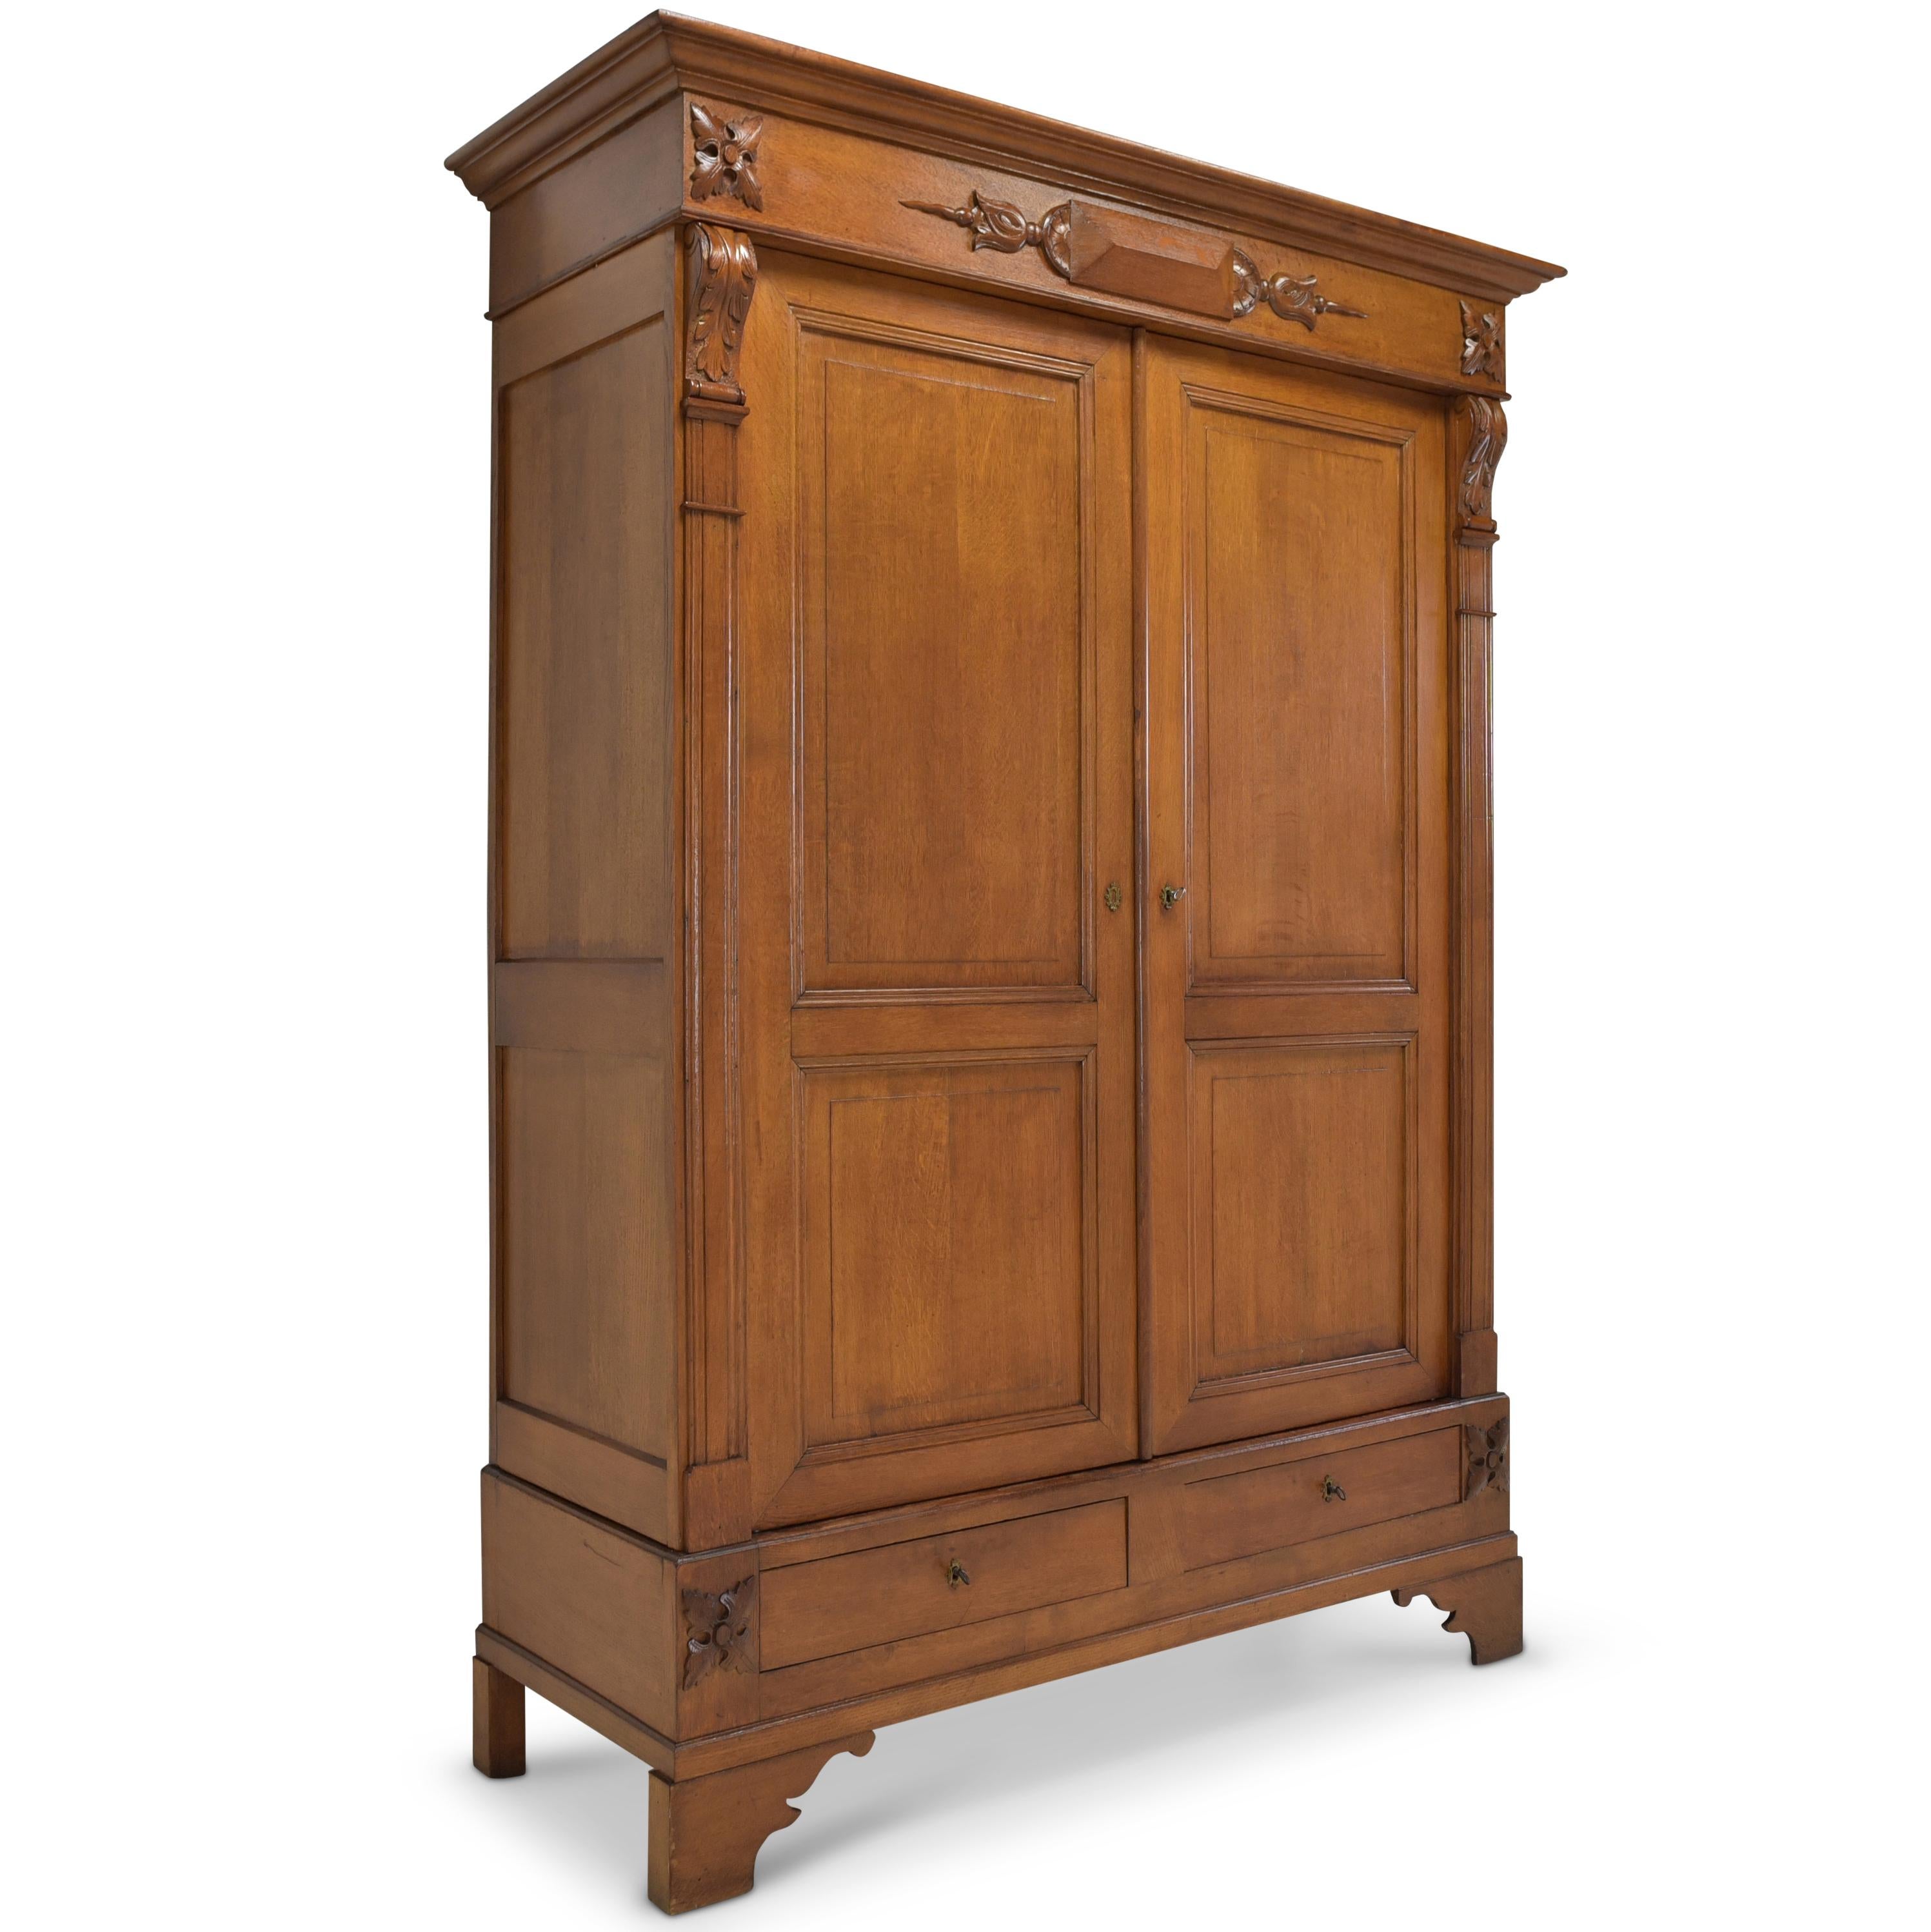 Hallway closet restored Gründerzeit around 1880 solid oak wardrobe

Features:
Solid oak body, solid softwood inside
Two-door model with clothes rail, shelf and two drawers
Carved applications
Attractive, quite light color tone
Beautiful